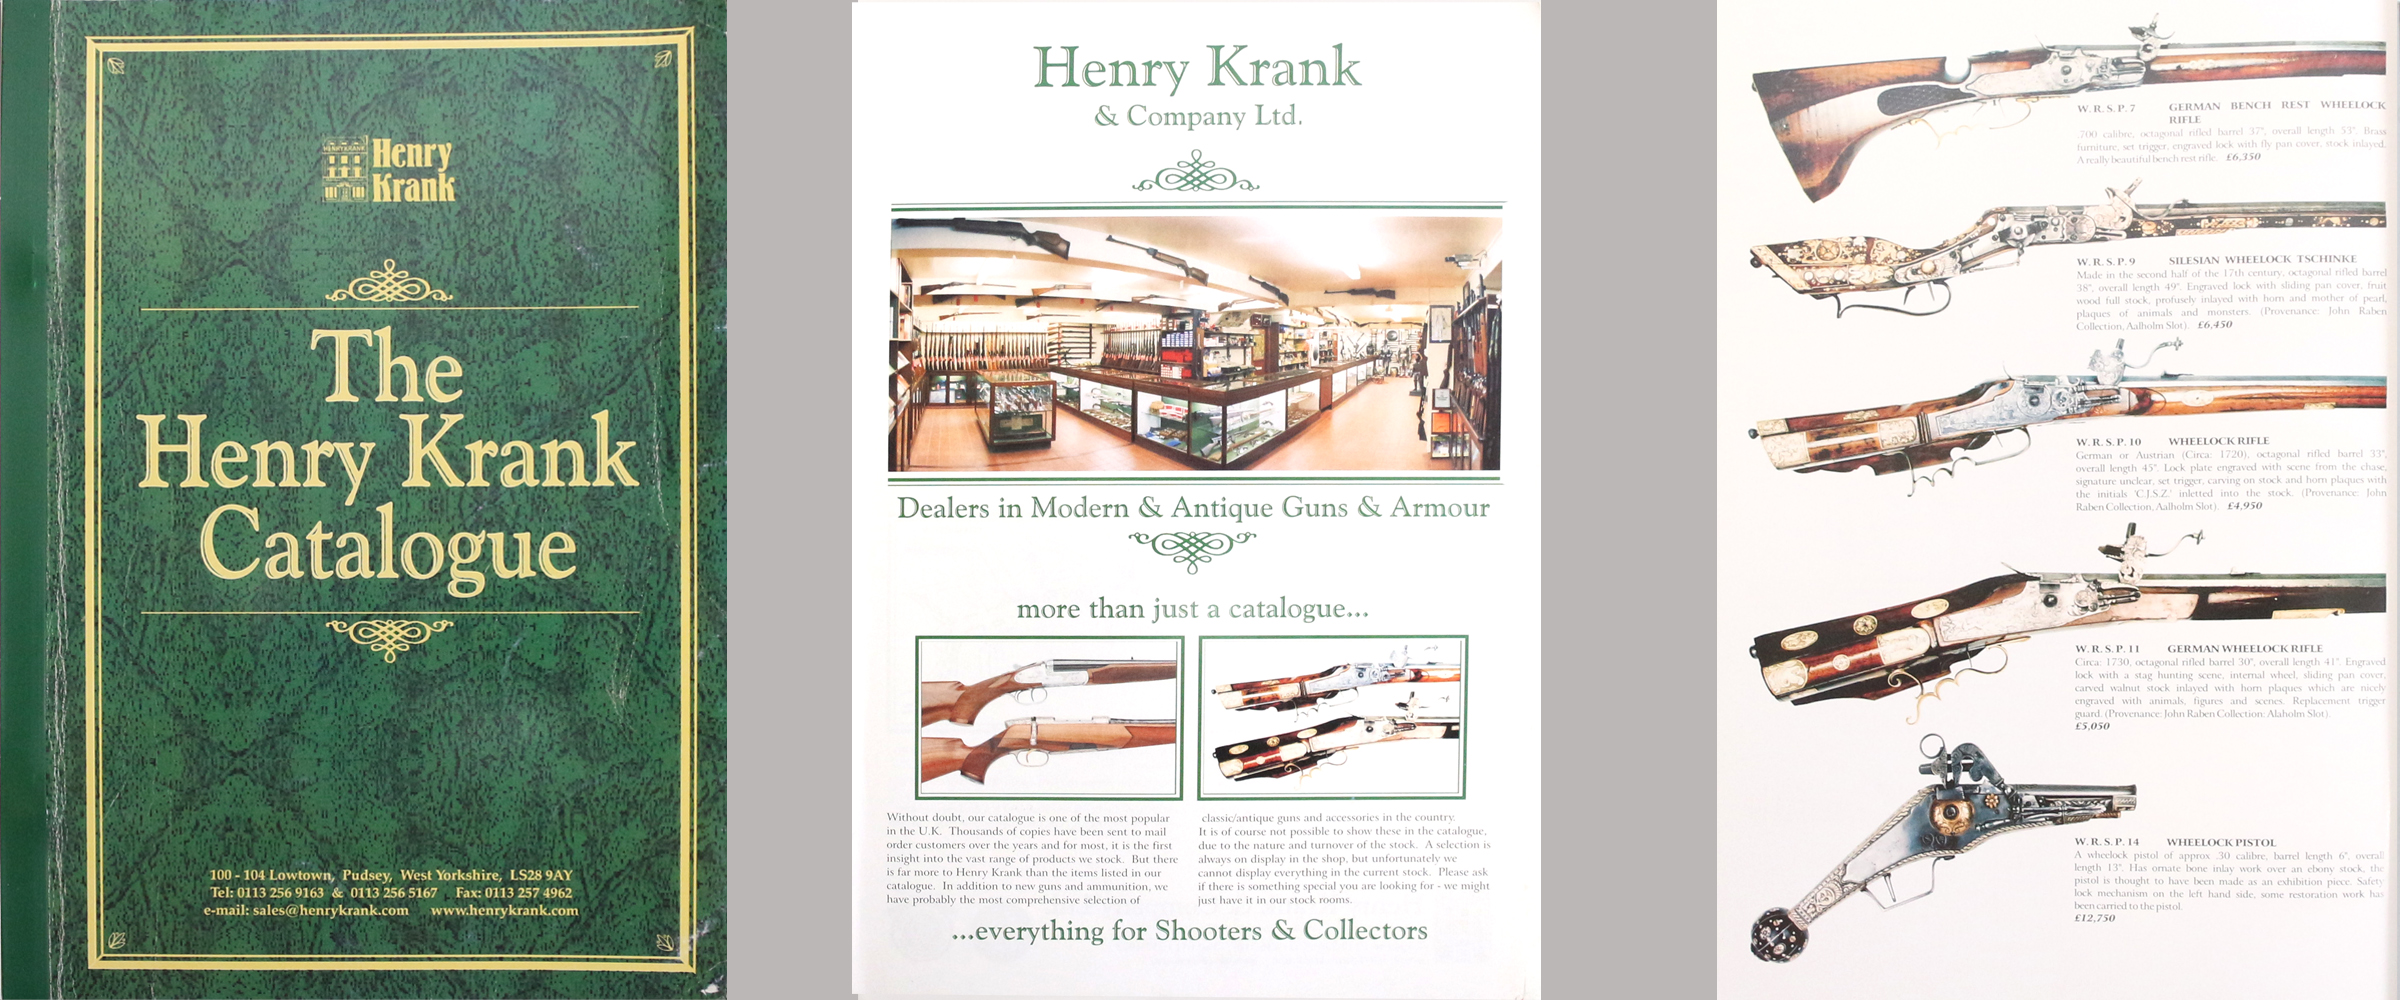 Undated Henry Krank Catalogue - late '90s/early '00s